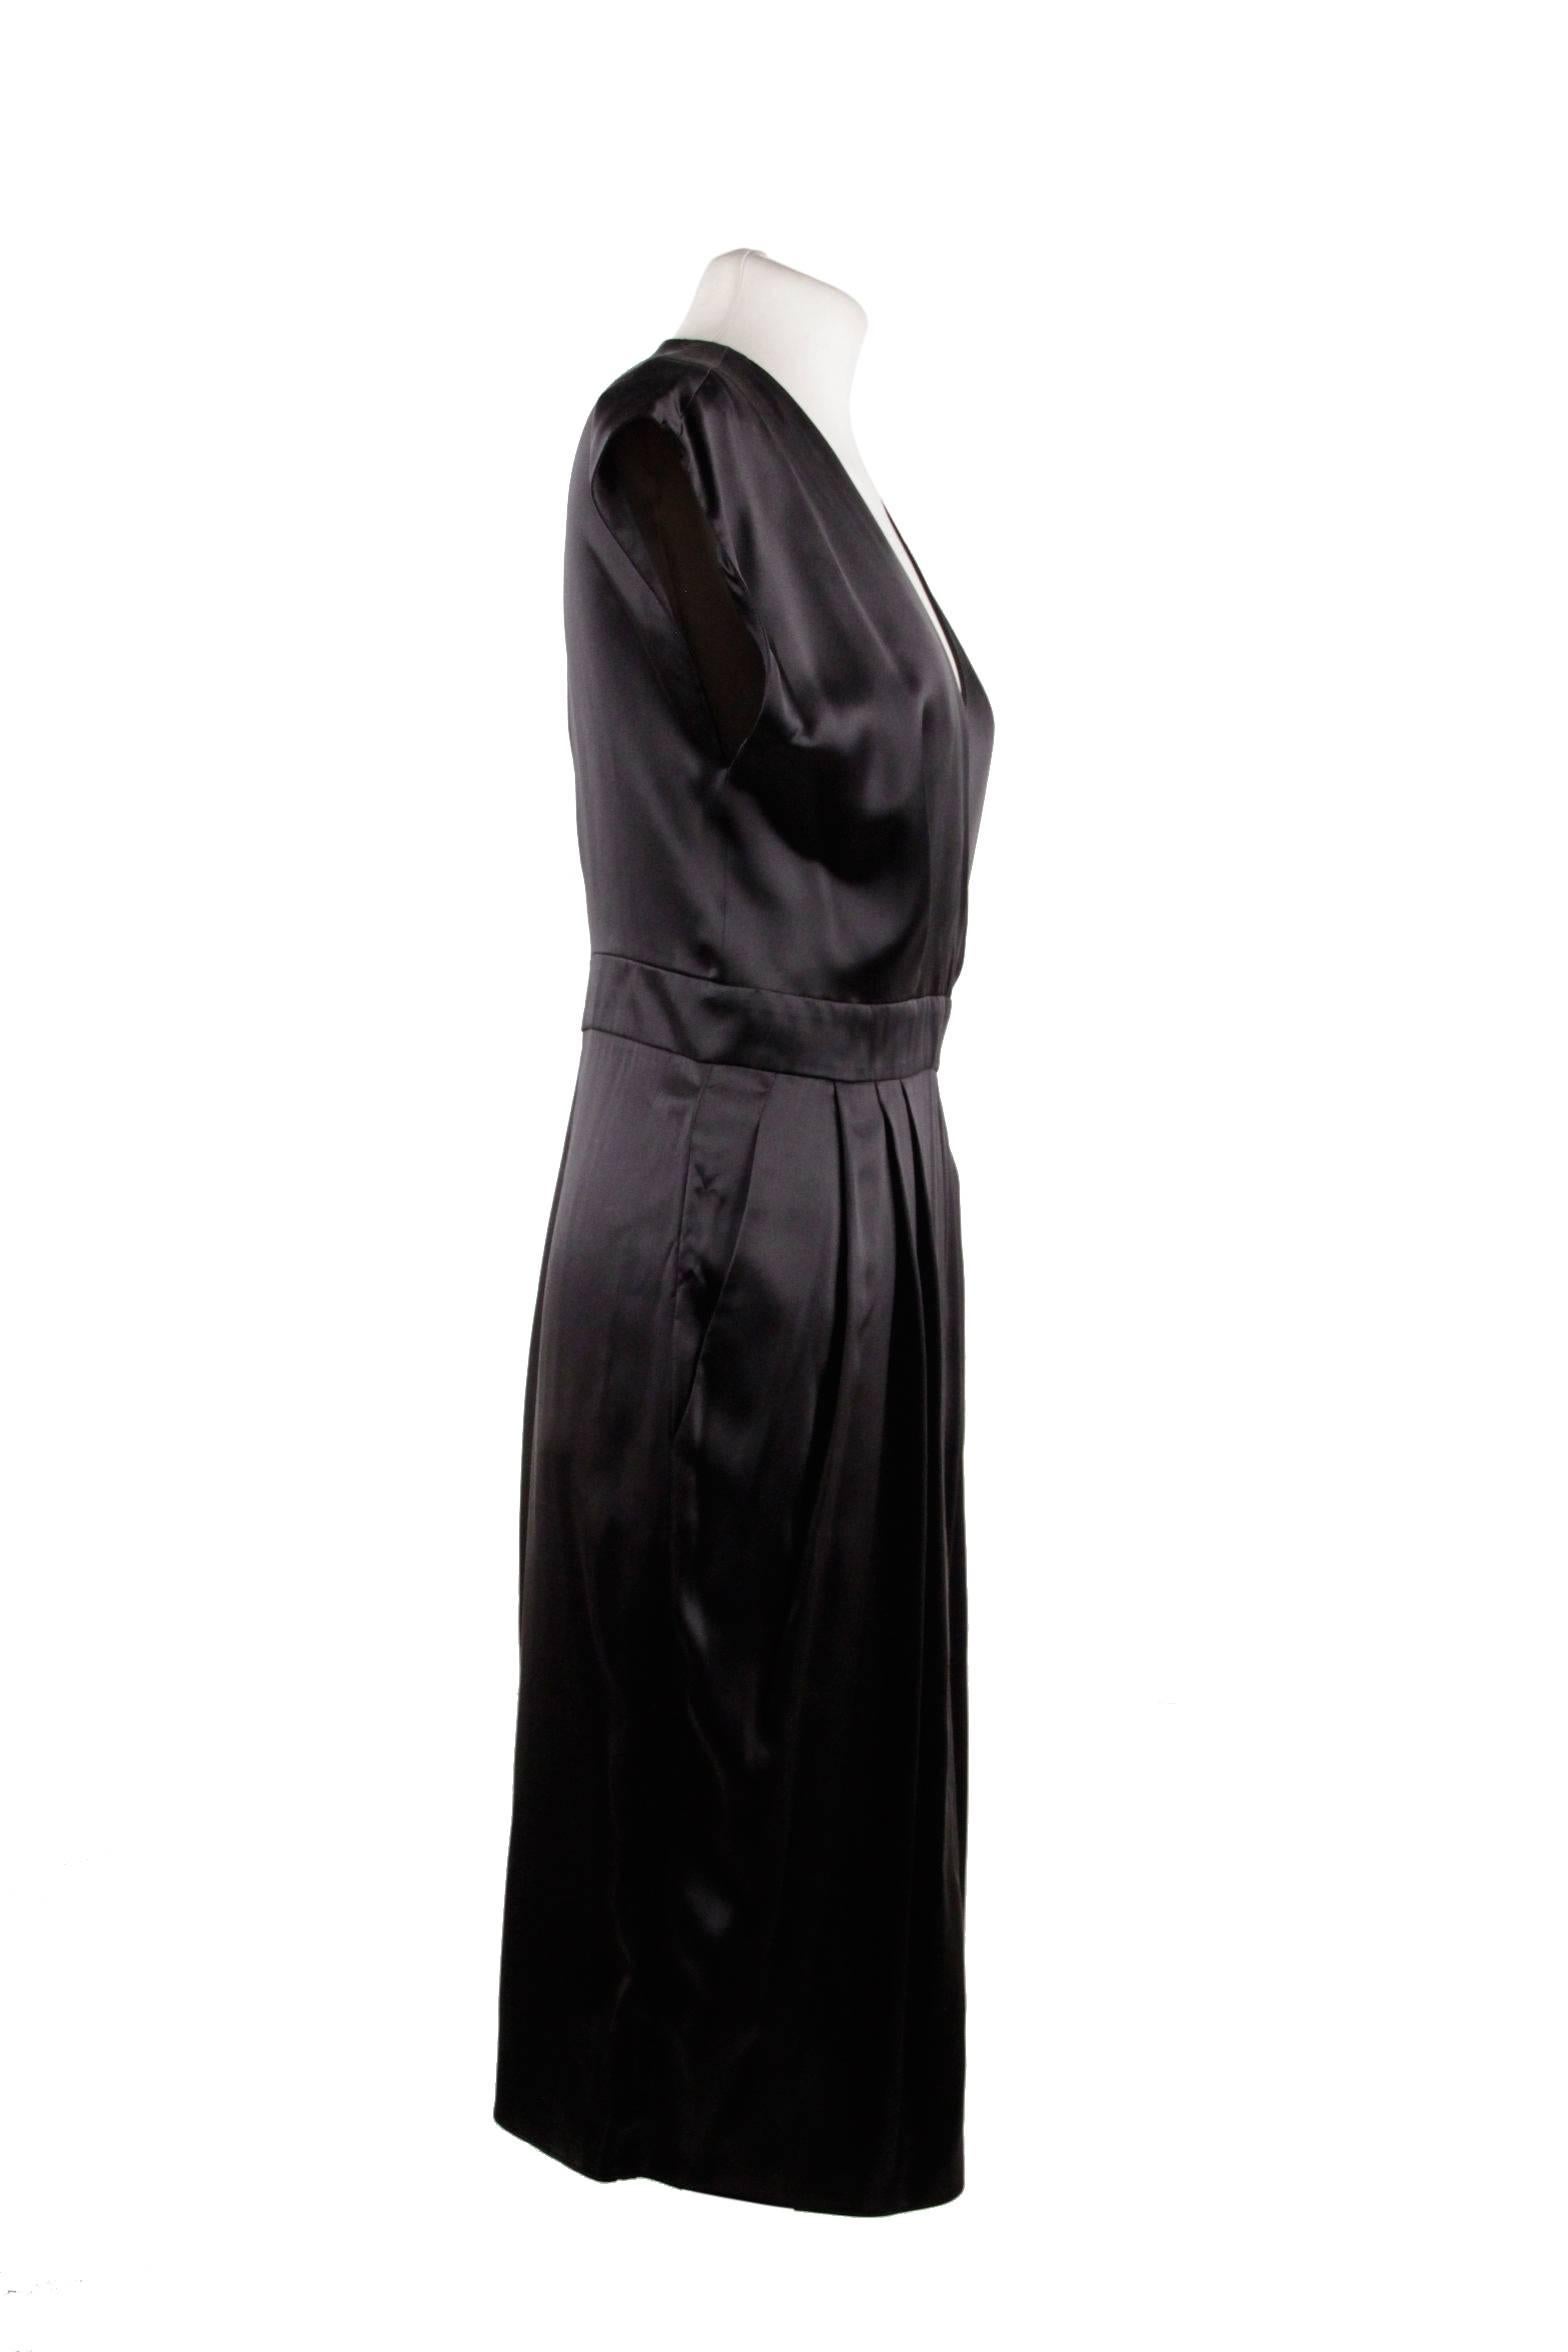  - Gucci dress in pure silk

- Black color

- Wrap design

- Rear zip closure

- 2 pockets on the waist

- Size 40 (The size shown for this item is the size indicated by the designer on the label).It shoul correspond to a SMALL